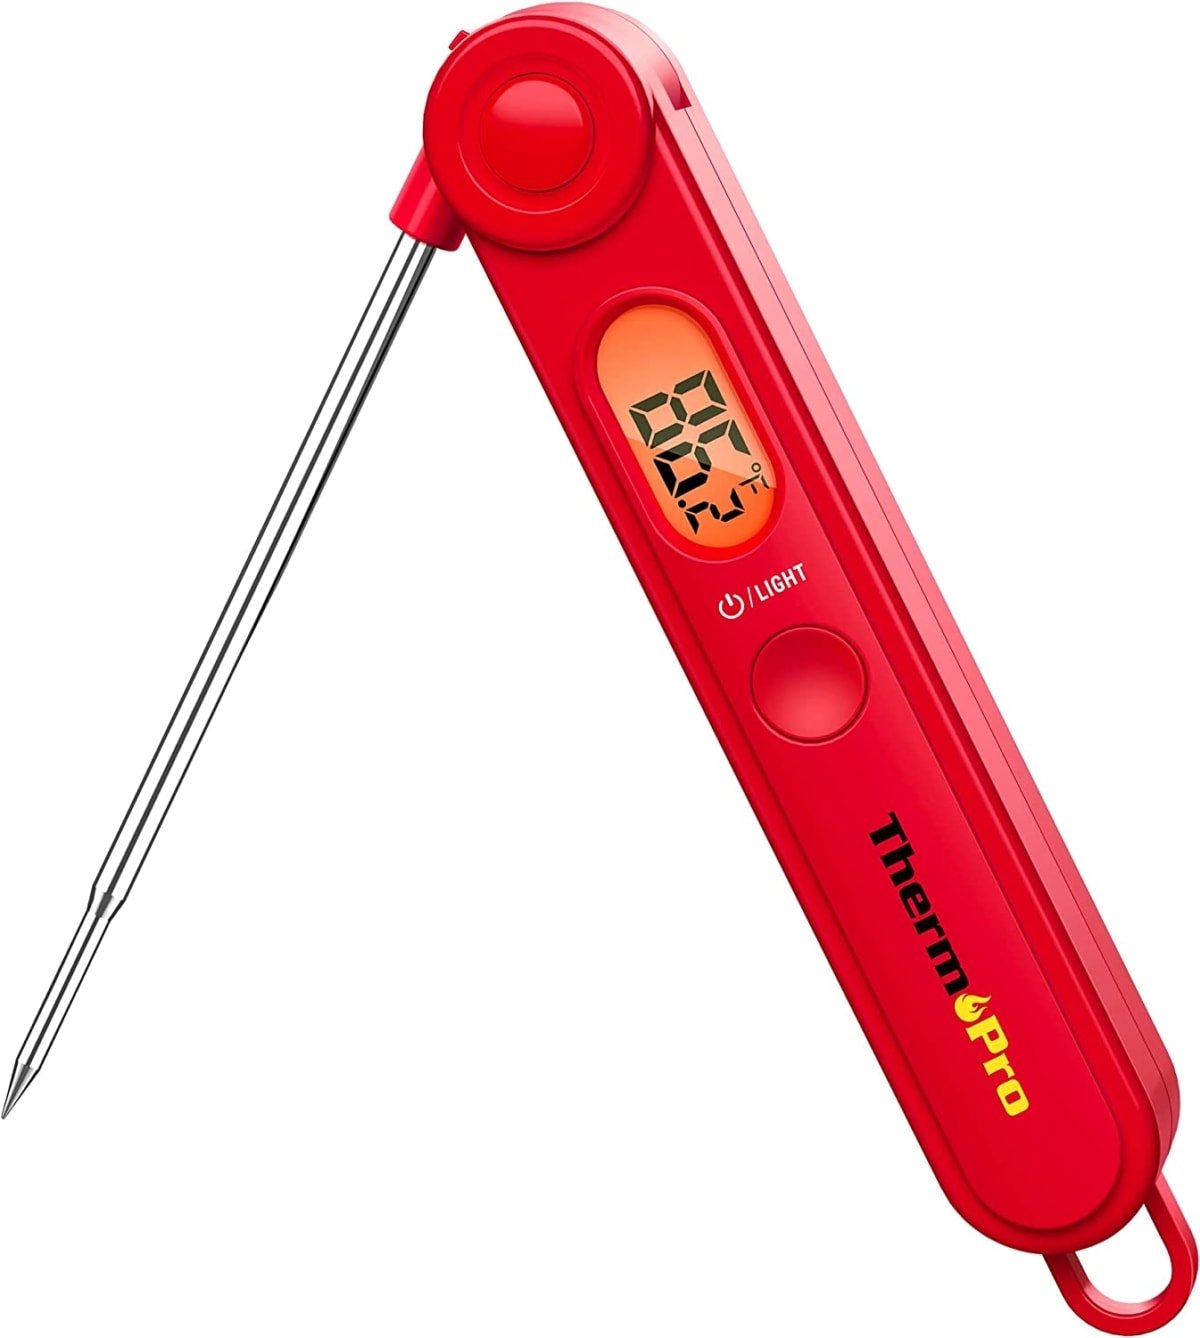 https://www.yellowblissroad.com/wp-content/uploads/2022/11/meat-thermometer-1200x1338.jpg